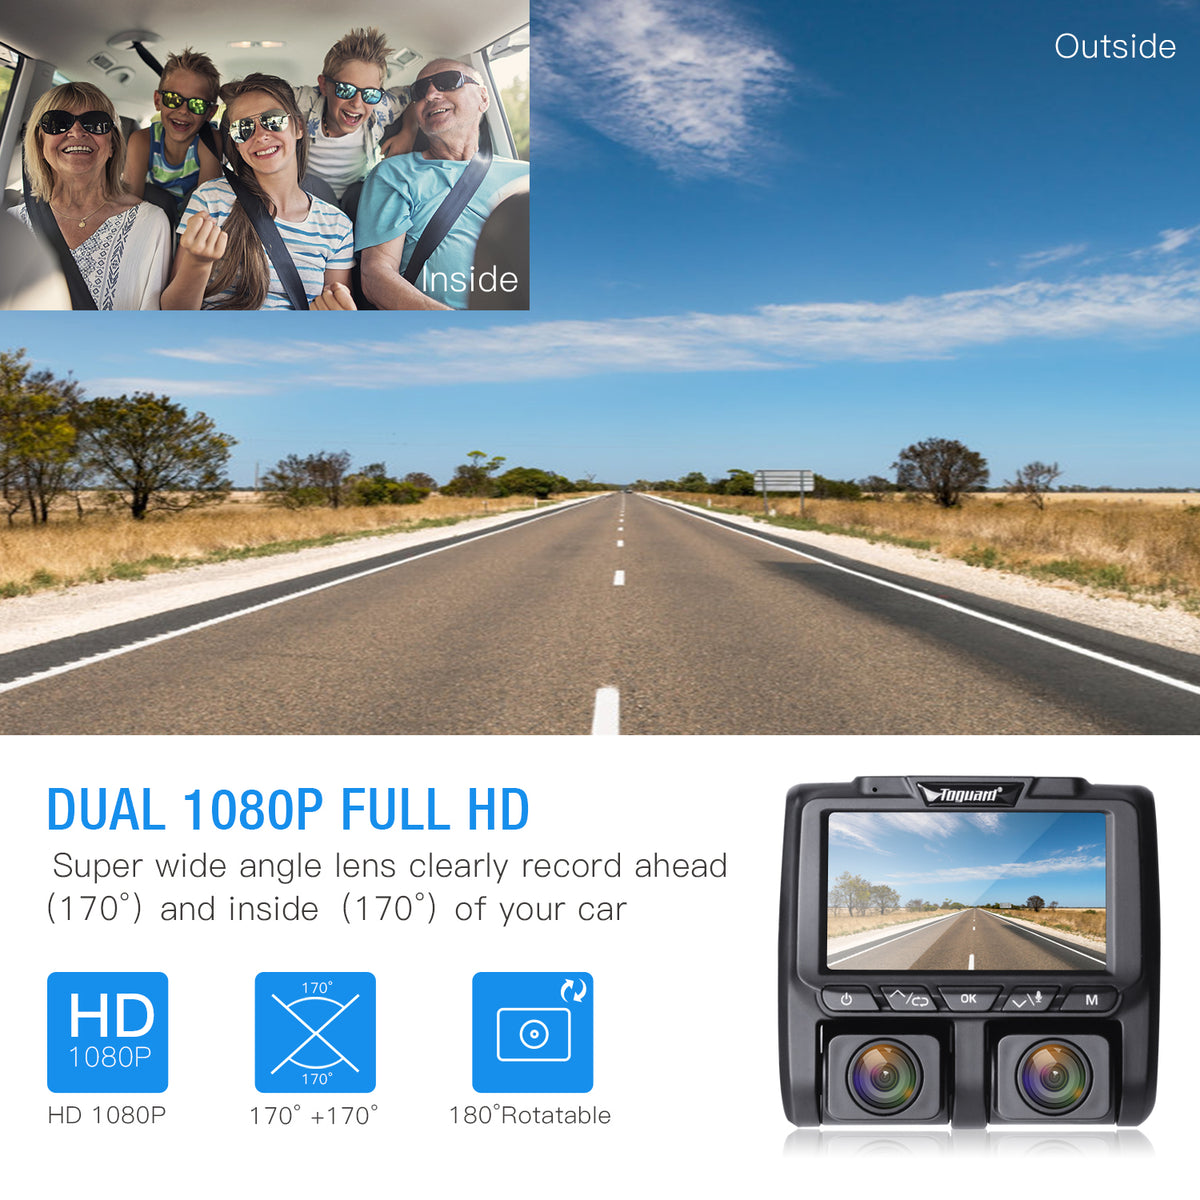 BuyOnline365.com - TOGUARD Uber Dual Dash Cam FHD 1080P+1080P Front and  Rear View Car #Camera 2 LCD 340° Outside and Inside Dual Dashboard #Camera  with #Sony Sensor, Loop Recording, Parking Mode for